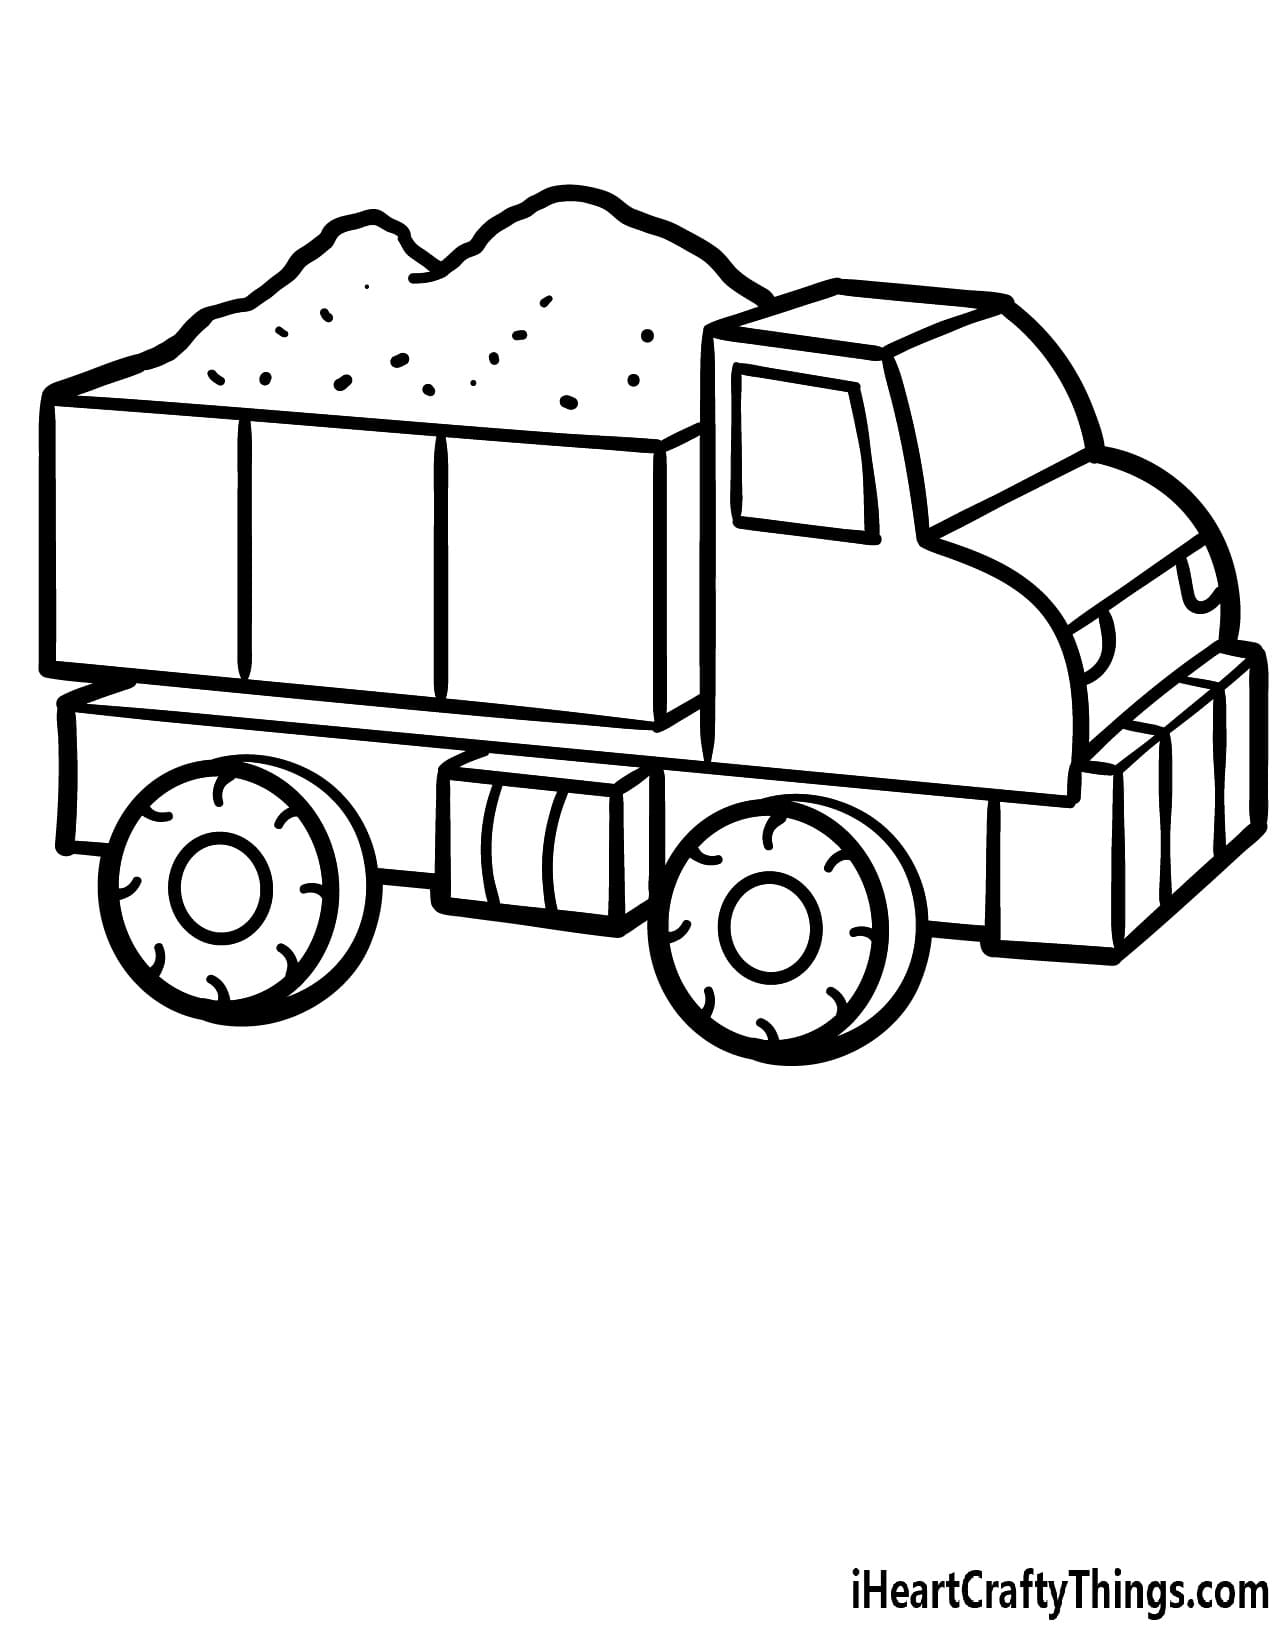 Dump Truck With Rocks Image For Kids